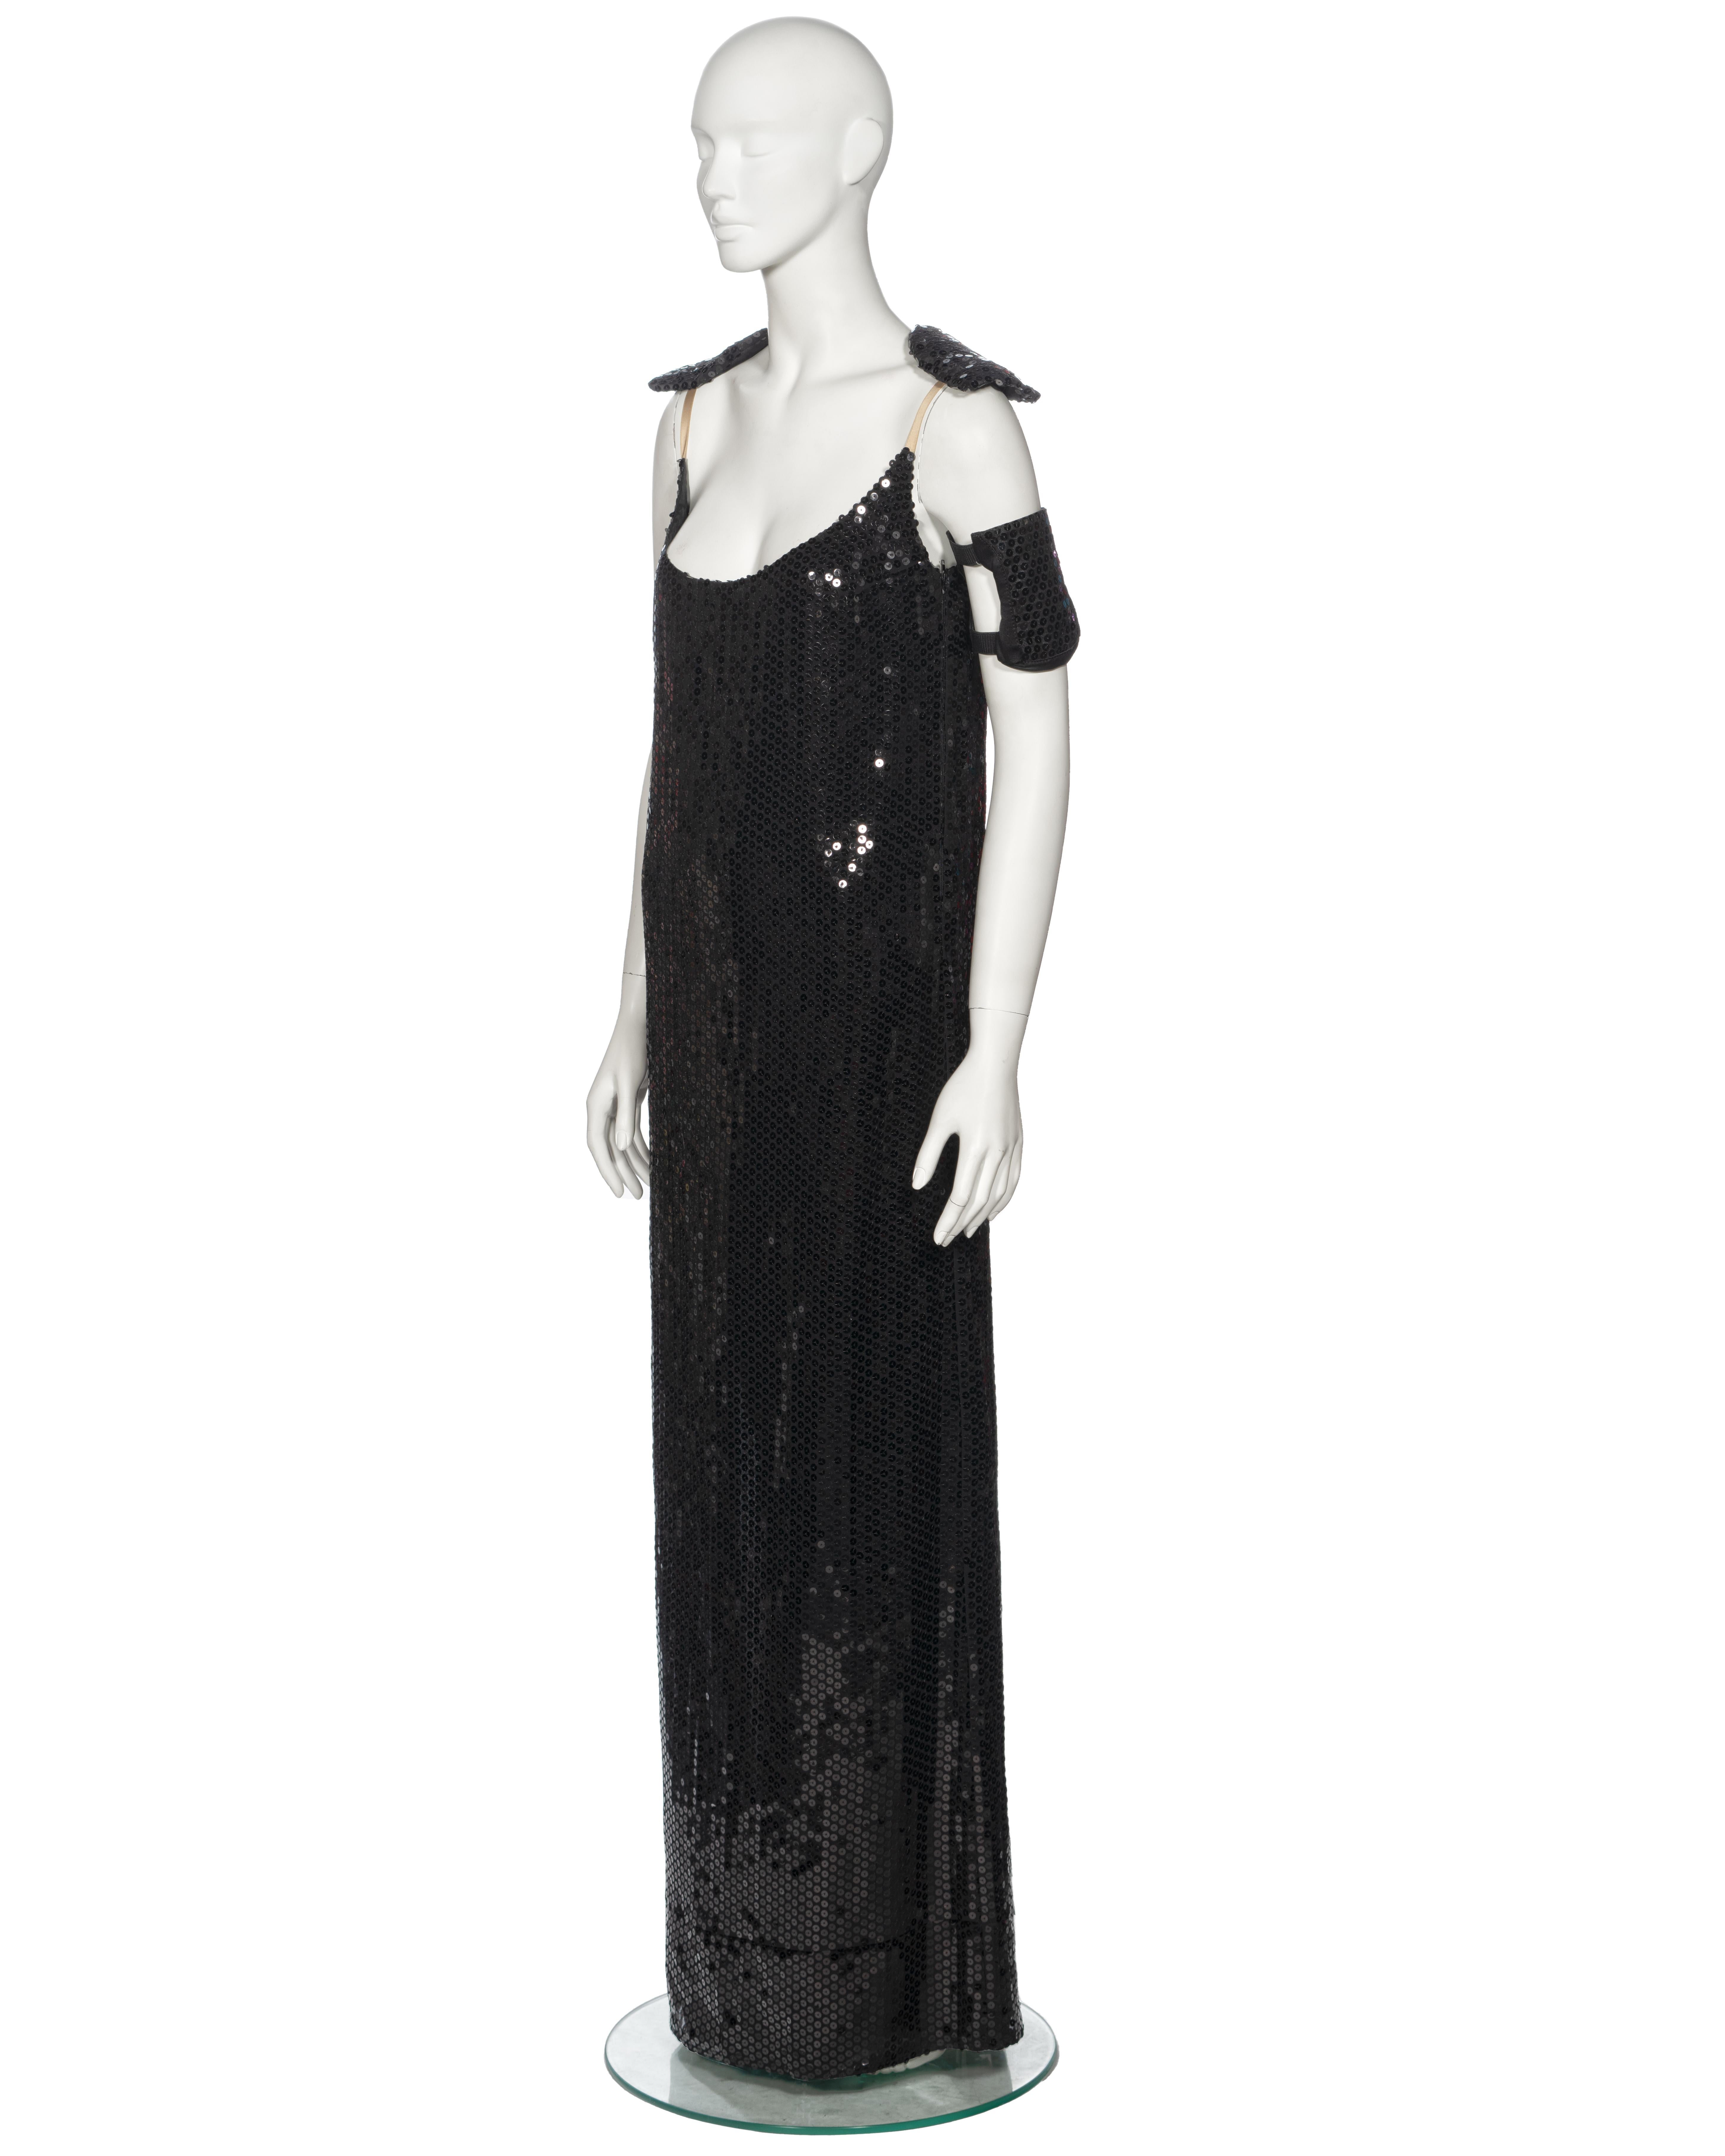 Helmut Lang Black Sequin Evening Dress With Armband, fw 1999 For Sale 13